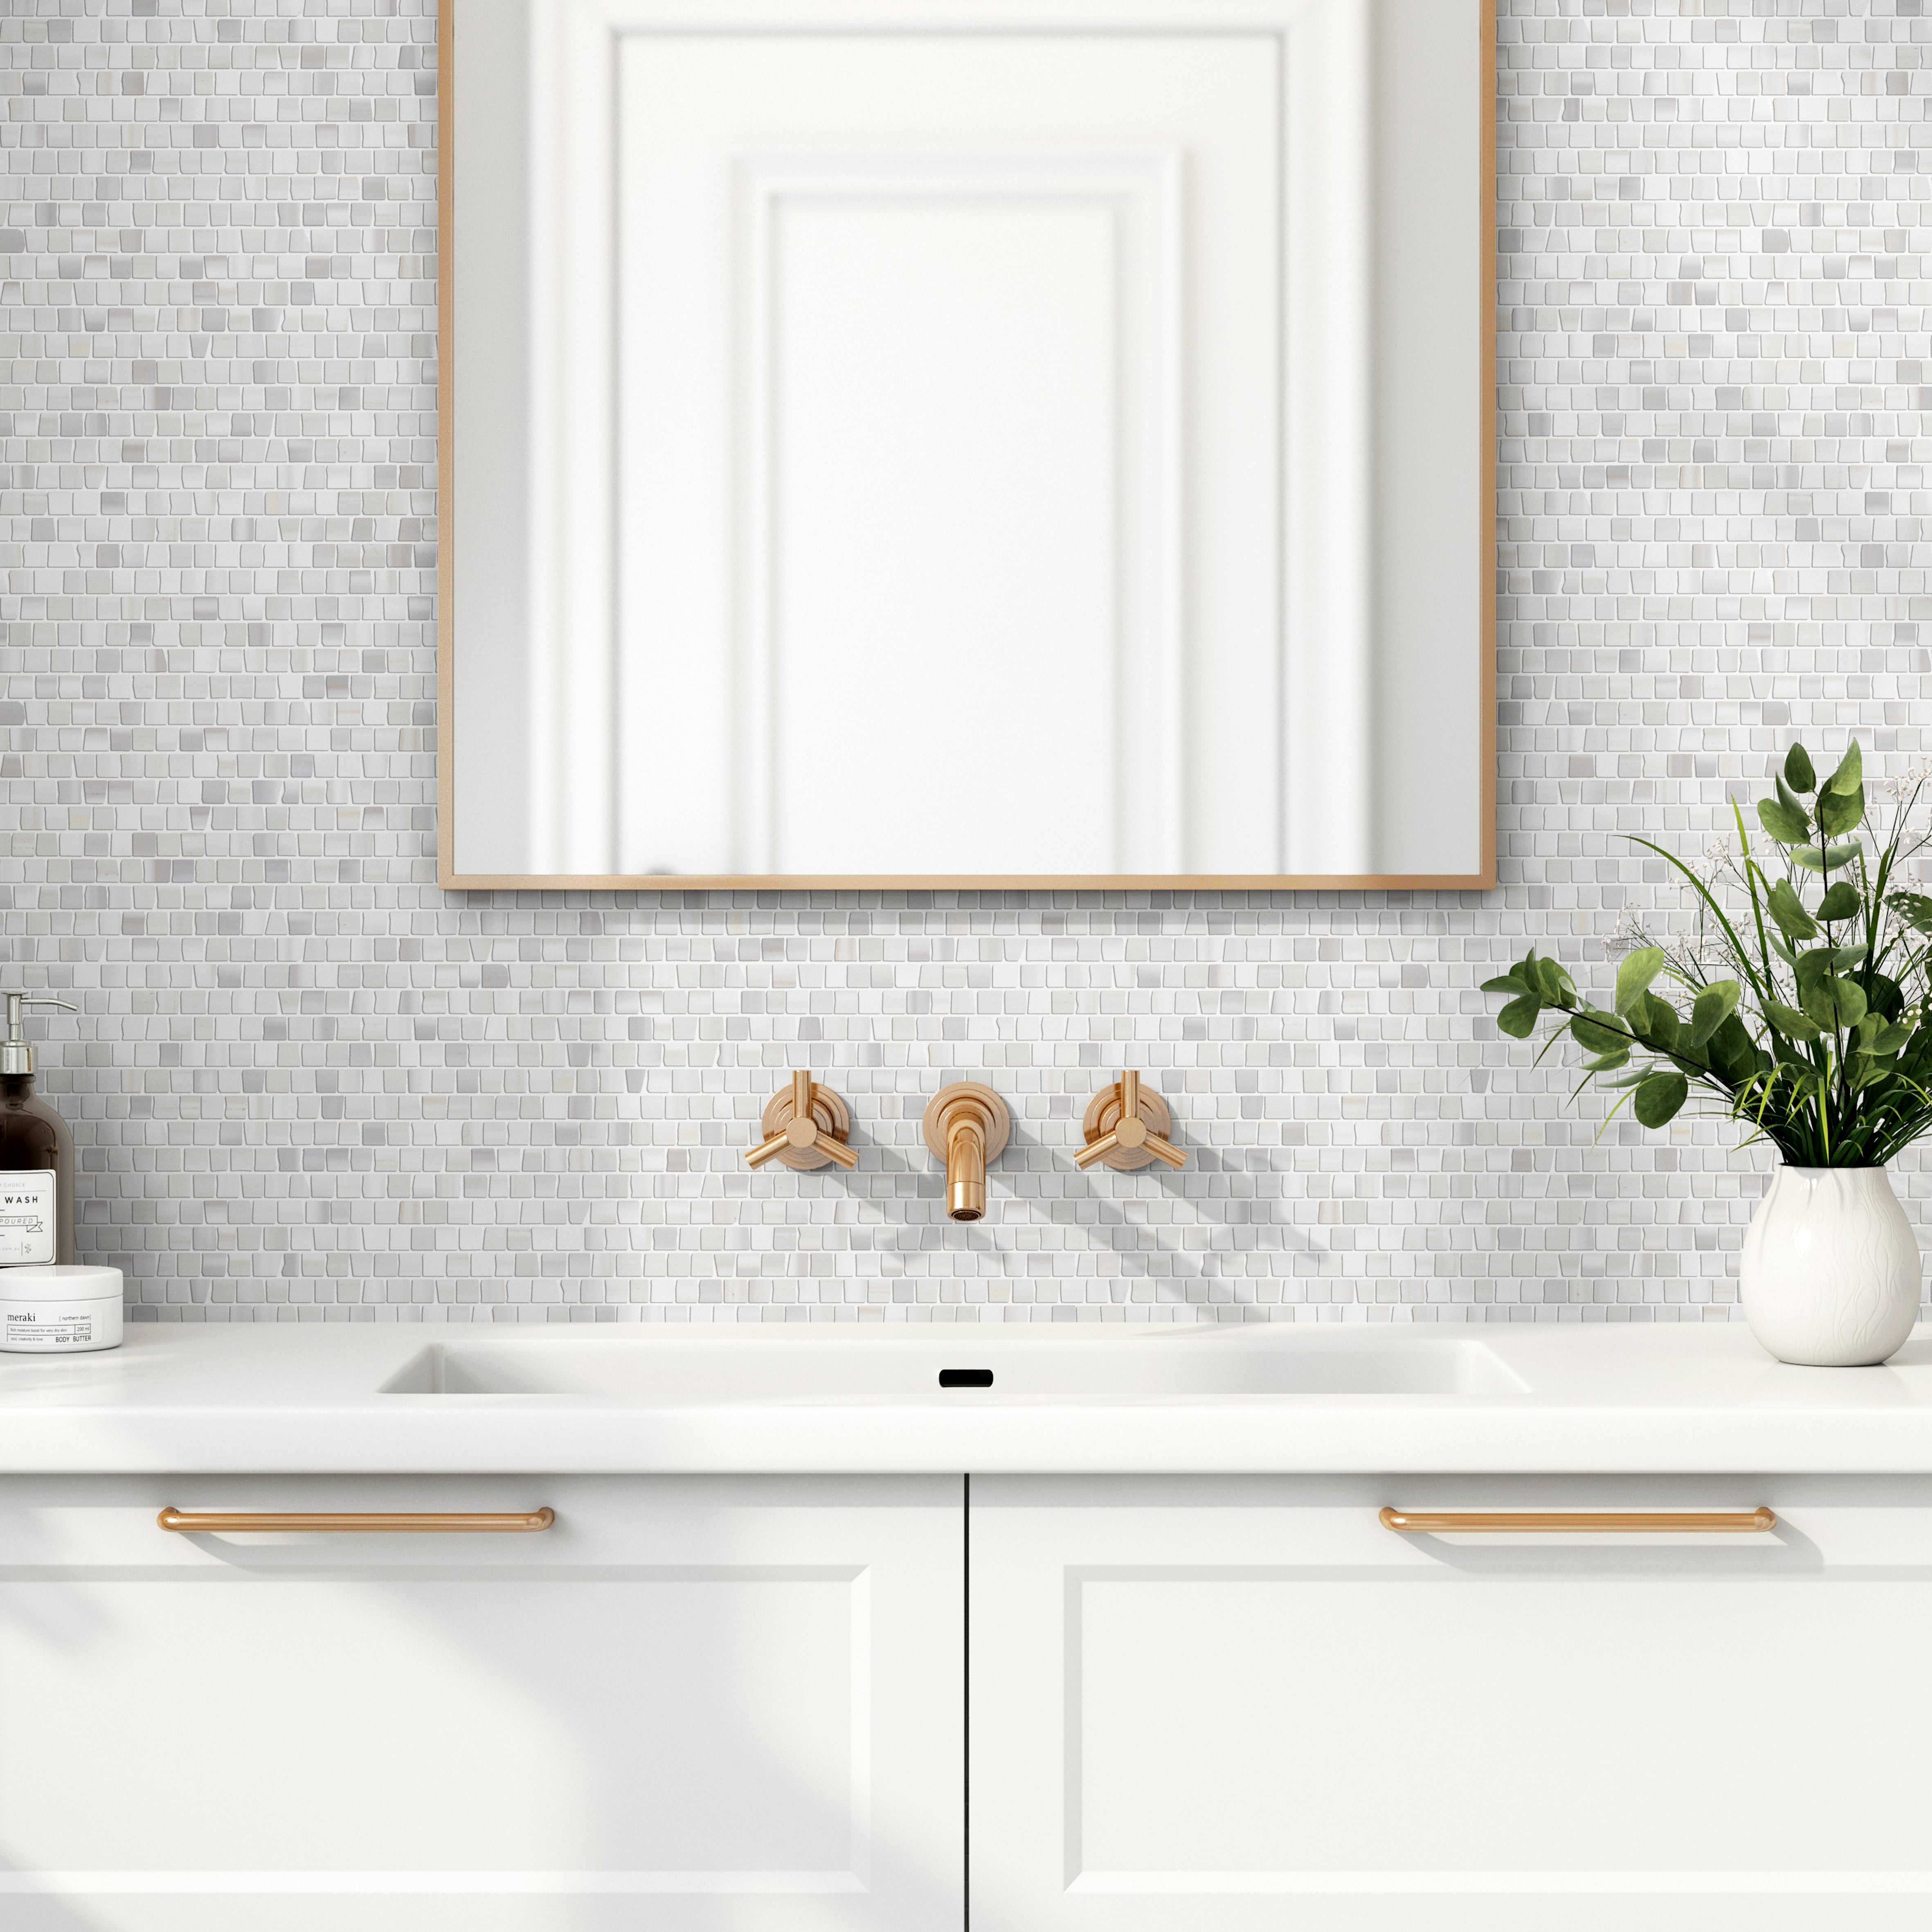 Venus white brokenjoint natural stone mosaic made by dulcet and sold by surface group international